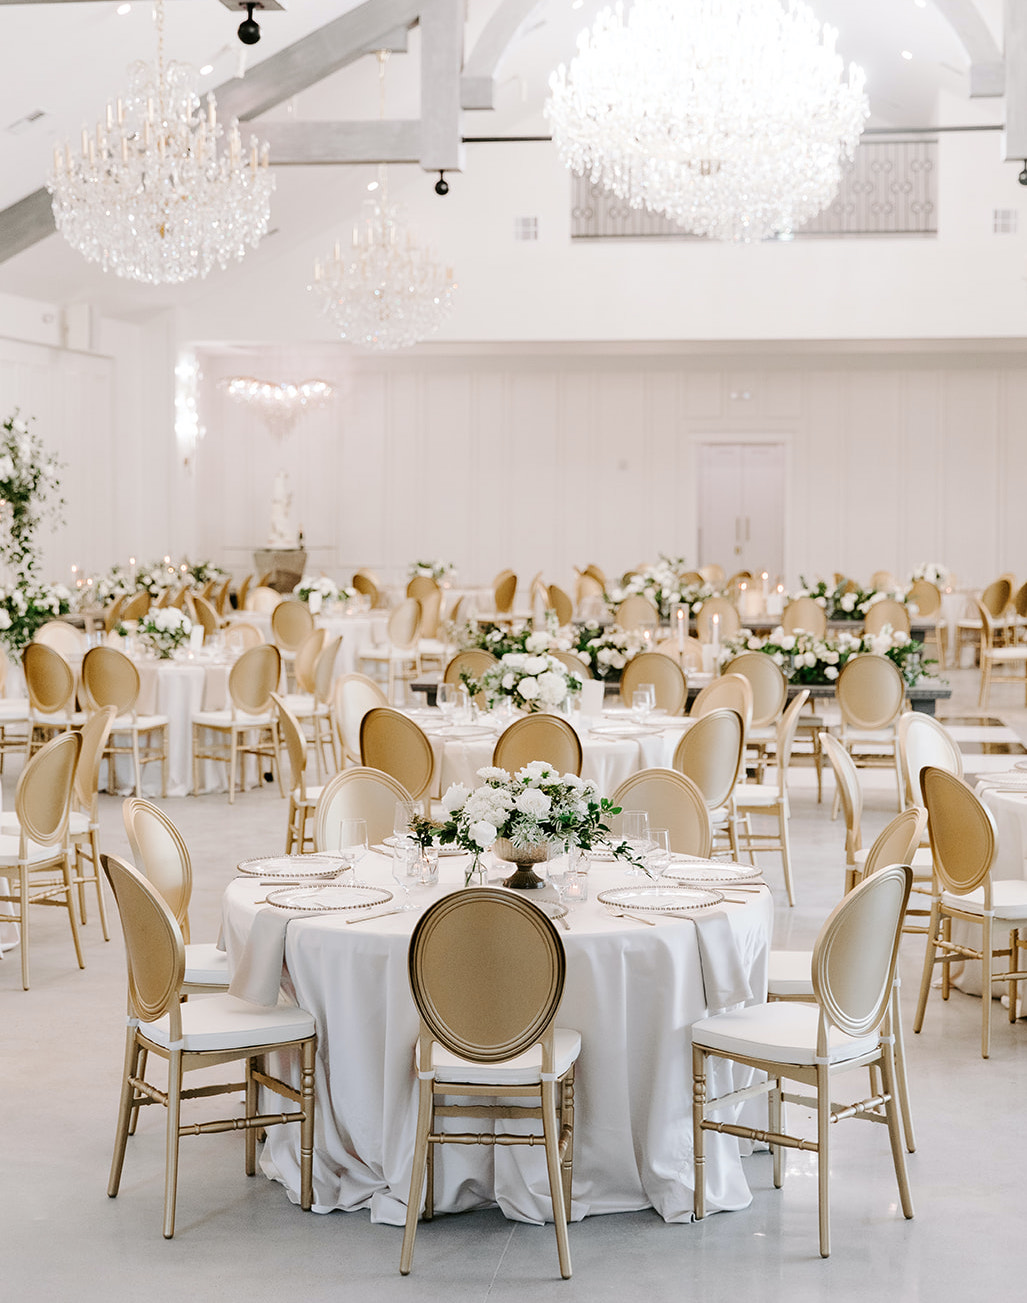 The reception room is decorated and ready for the wedding party and guests. Crystal chandeliers hang from the ceiling and lush greenery and ivory blooms fill the centerpieces on the tables.